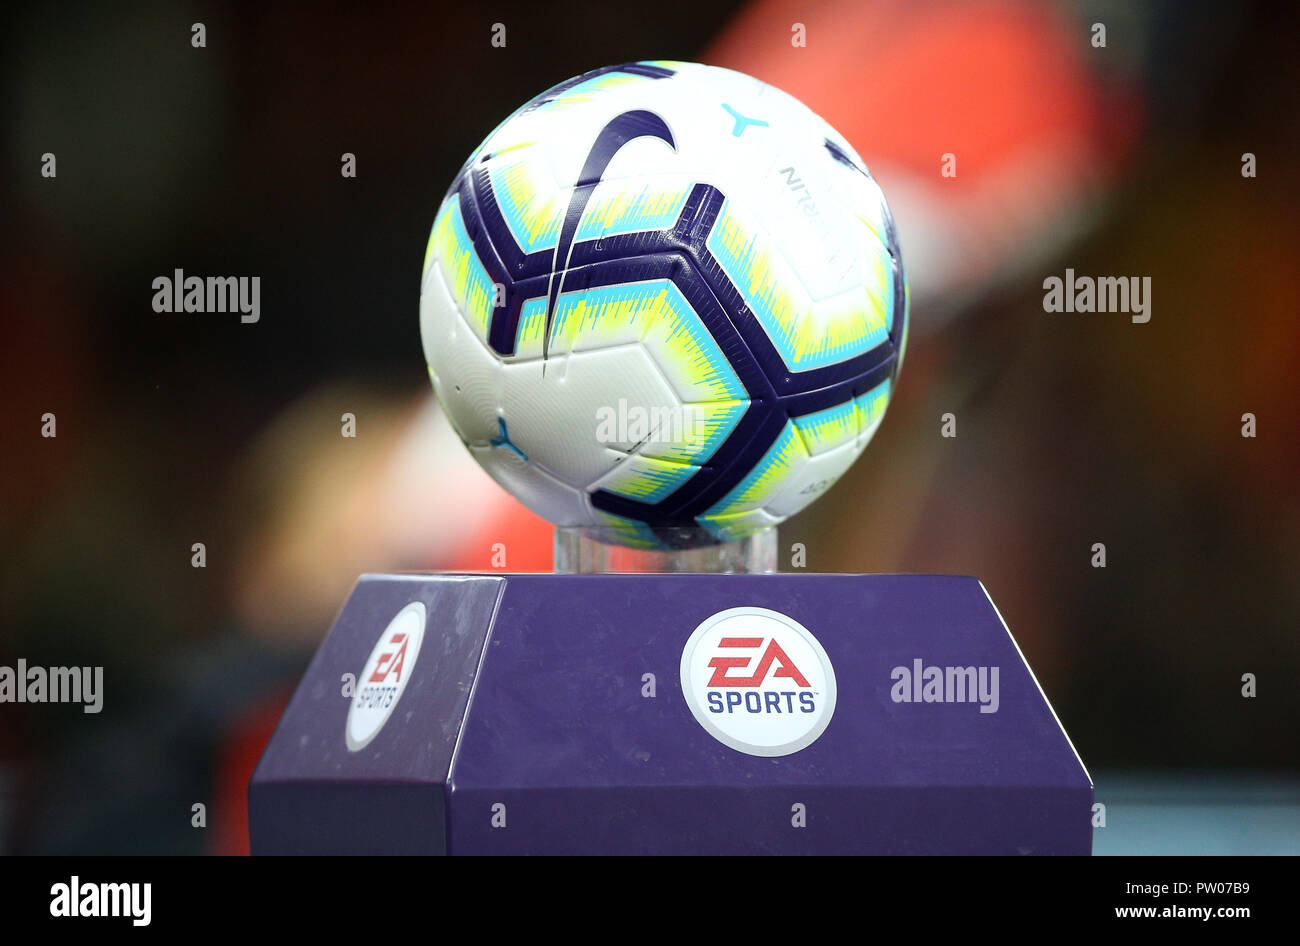 A general view of the Nike Merlin match ball on display before the Premier  League match at the Vitality Stadium, Bournemouth Stock Photo - Alamy